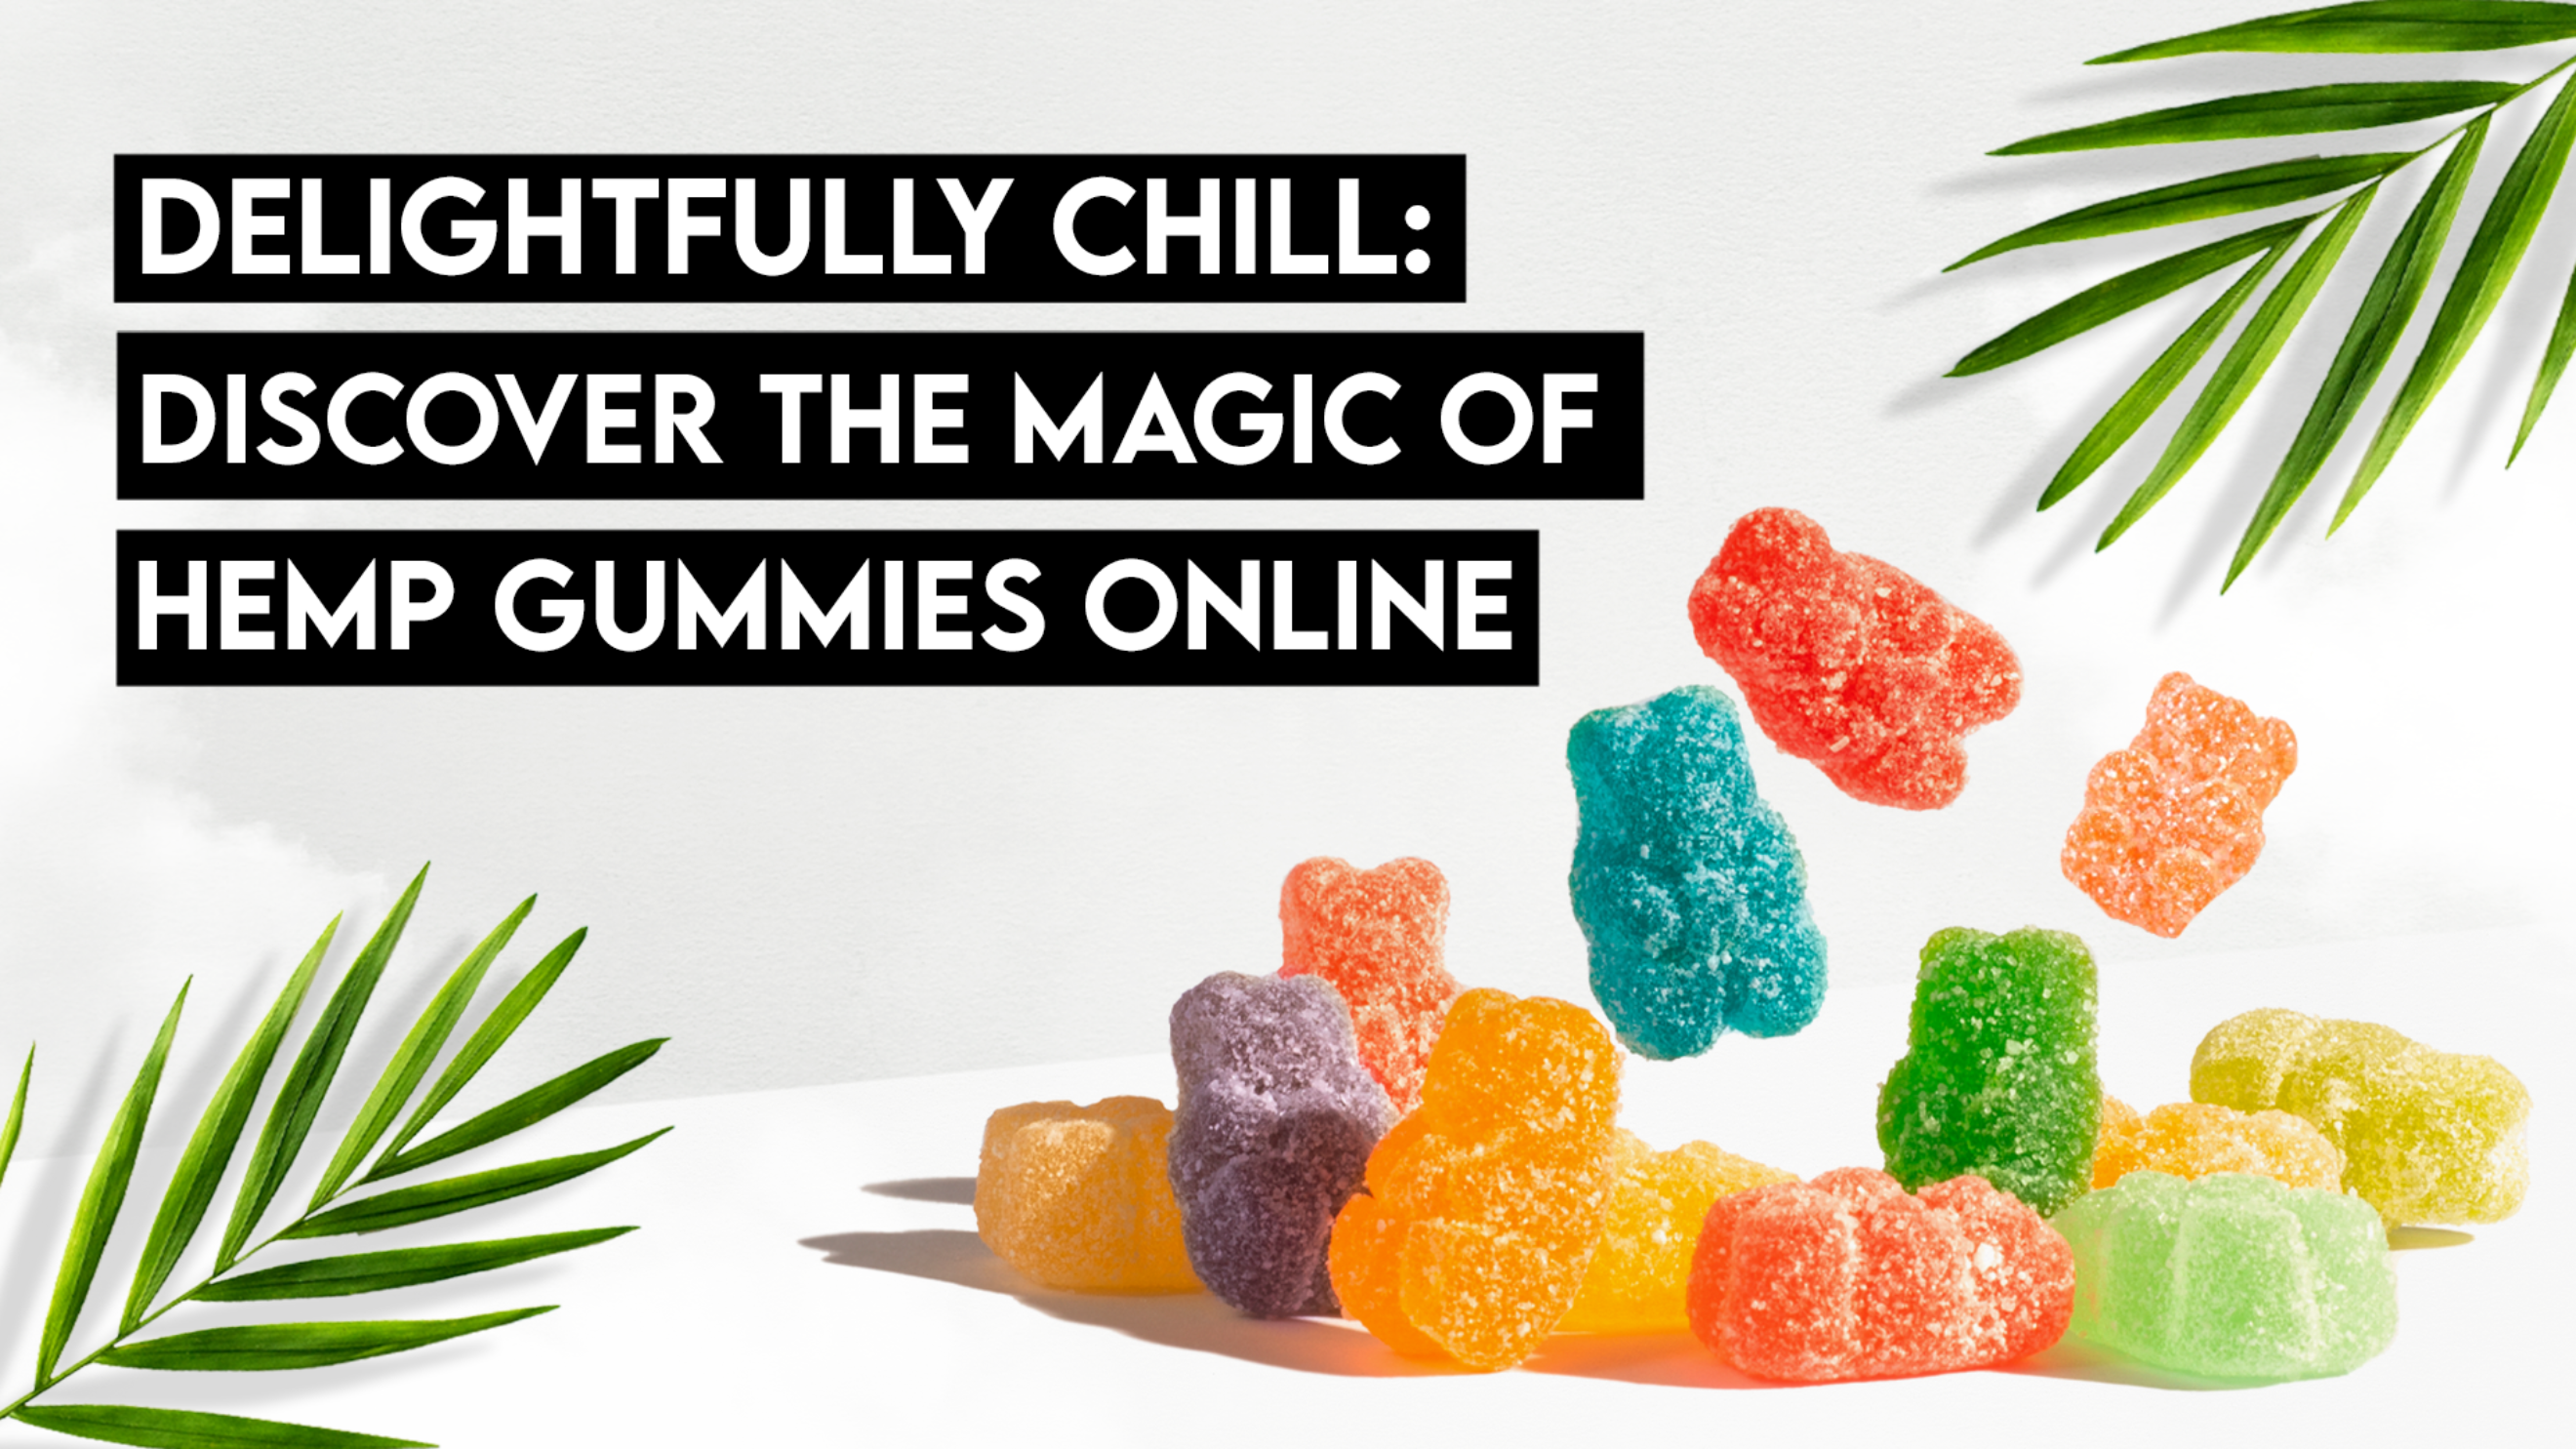 Delightfully Chill: Discover the Magic of Hemp Gummies Online!